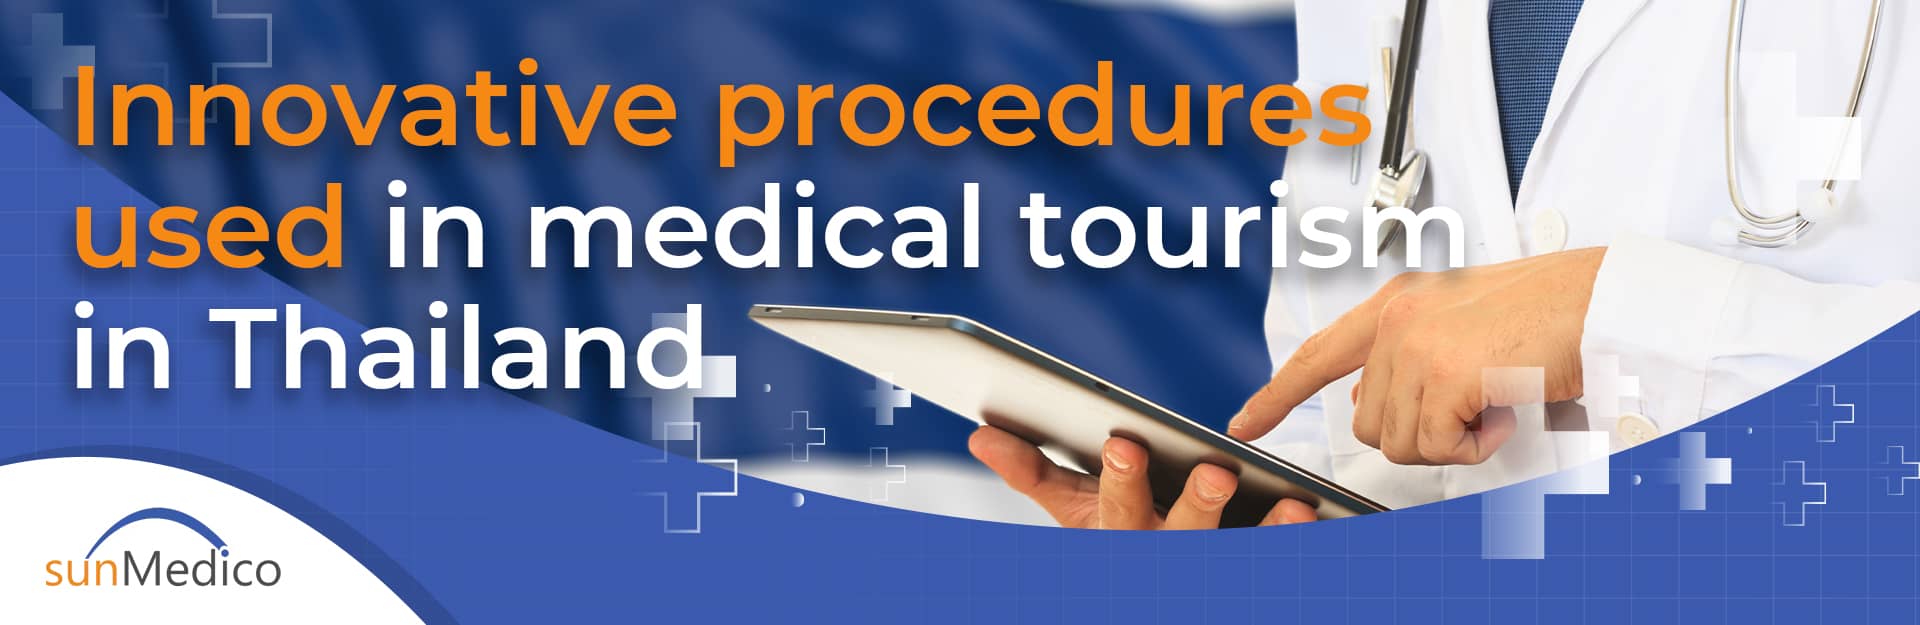 Innovative procedures used in medical tourism in Thailand